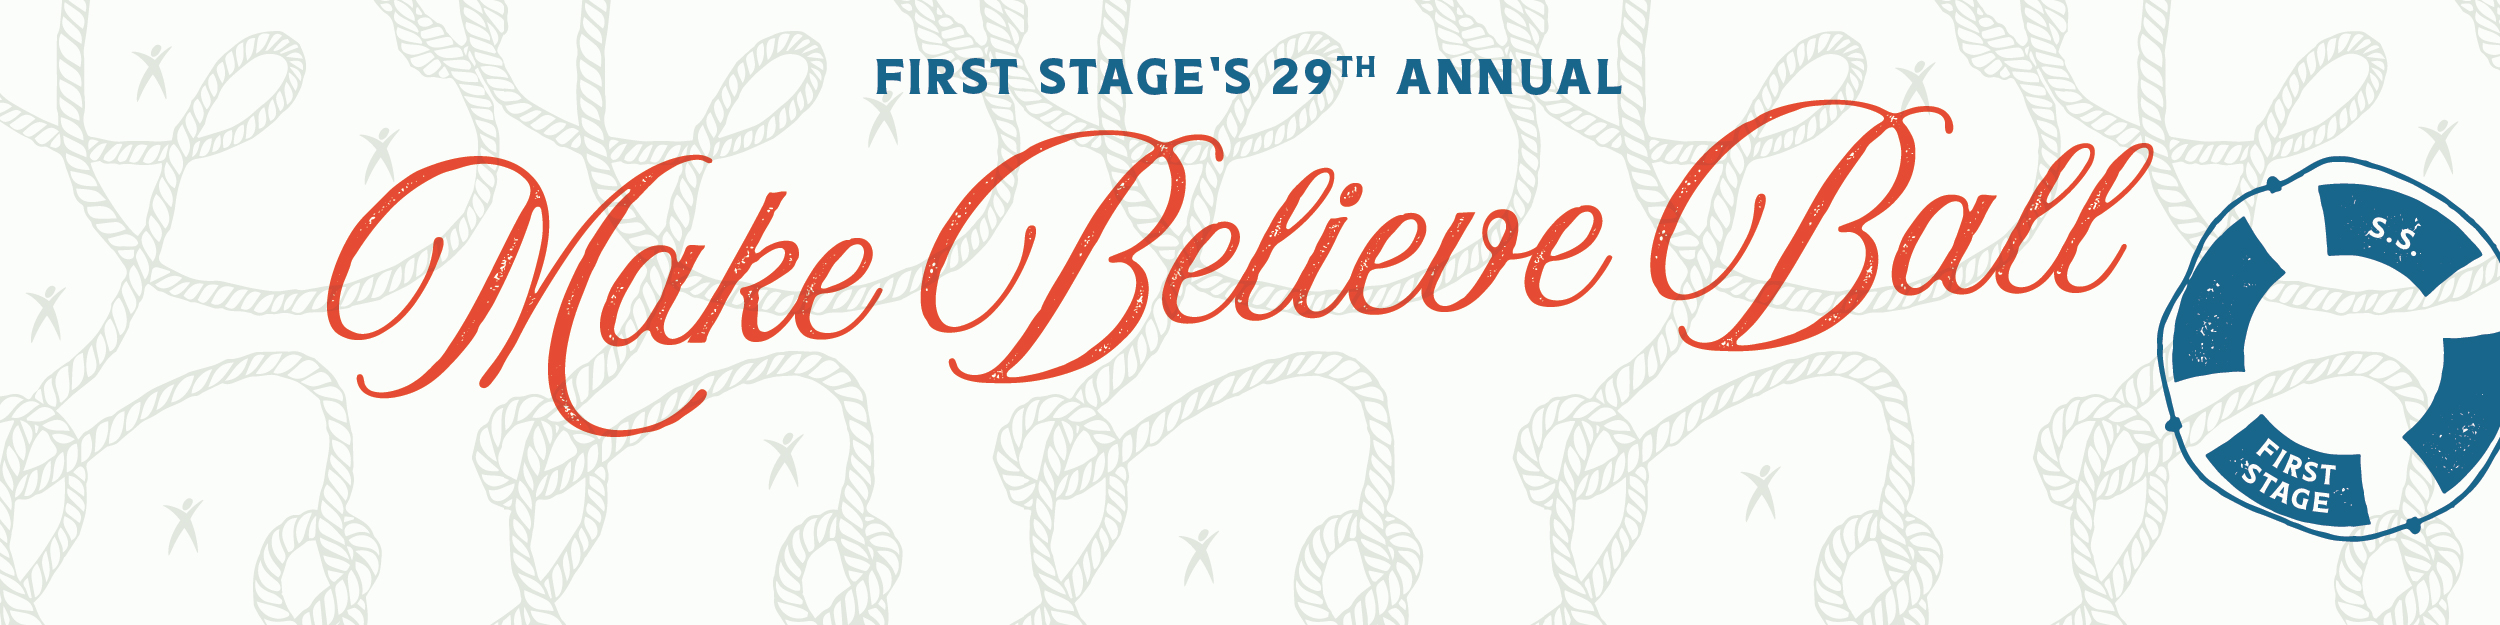 First Stage's 29th Annual Make Believe Ball